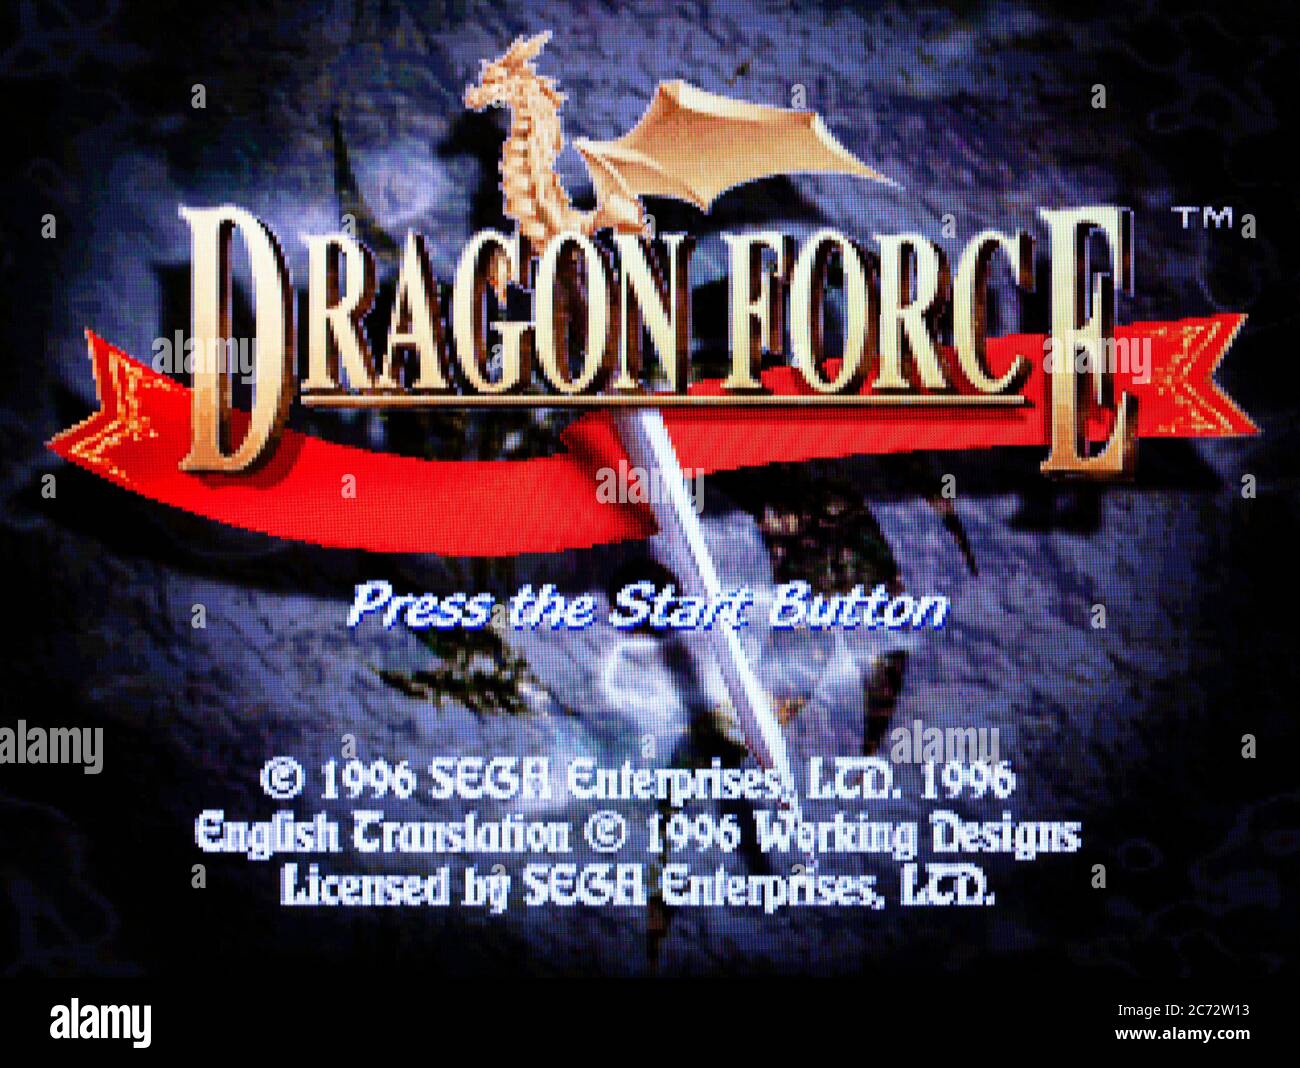 Dragon Force - Sega Saturn Videogame - Editorial use only Stock Photo